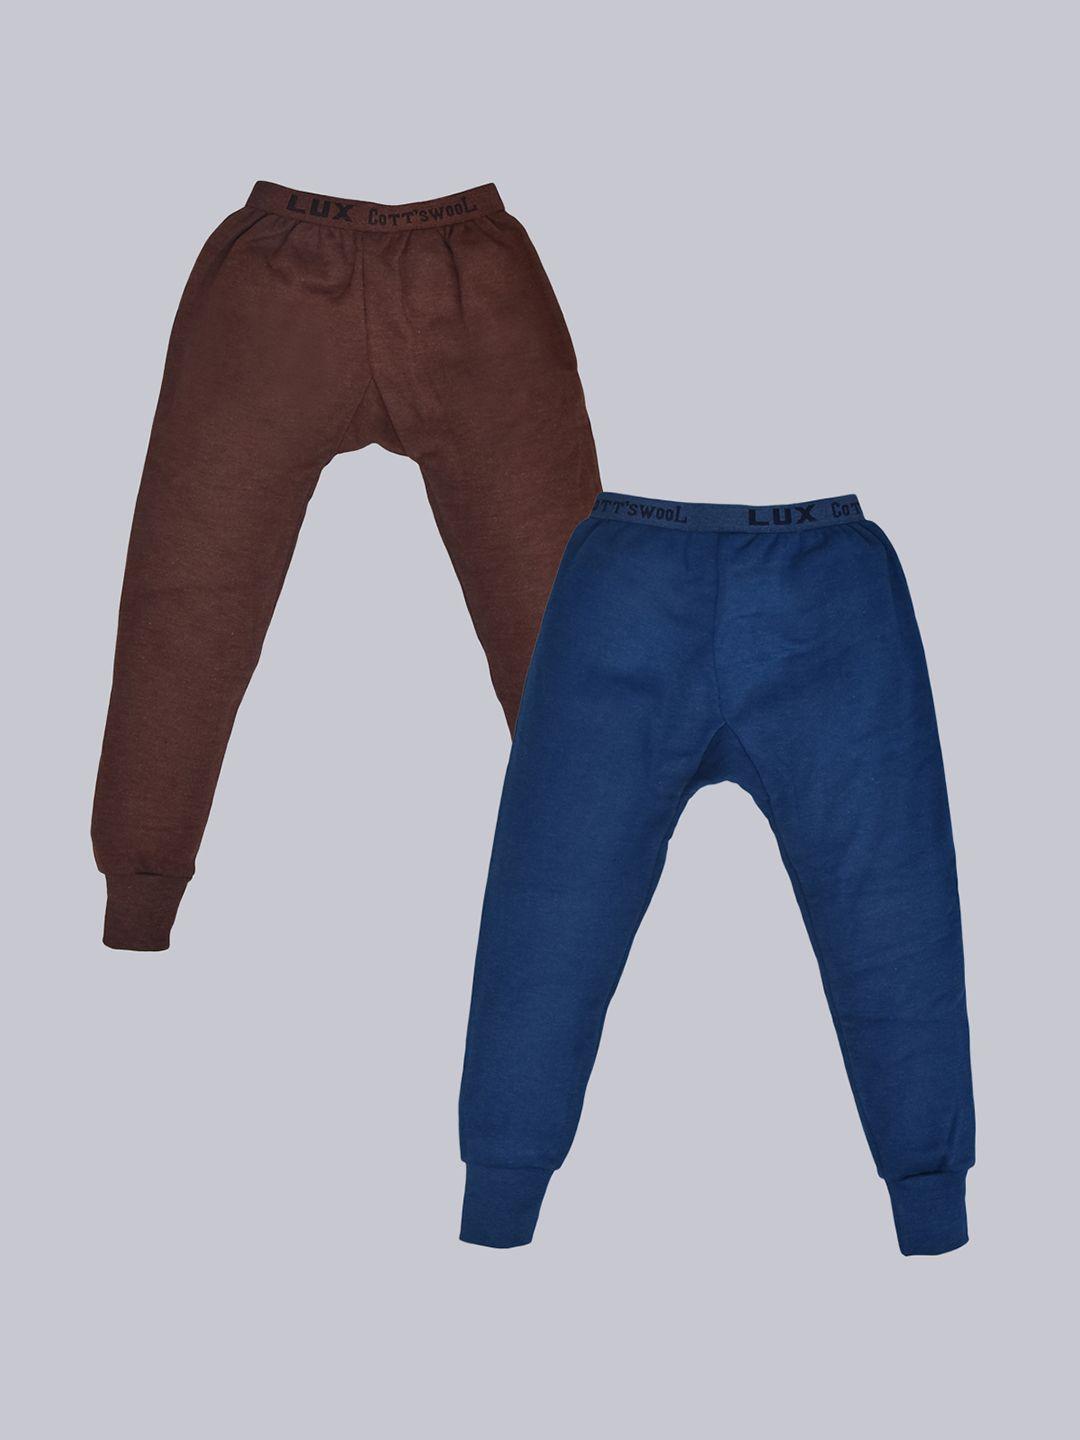 lux-cottswool-boys-set-of-2-blue-&-brown-solid-cotton-thermal-bottoms